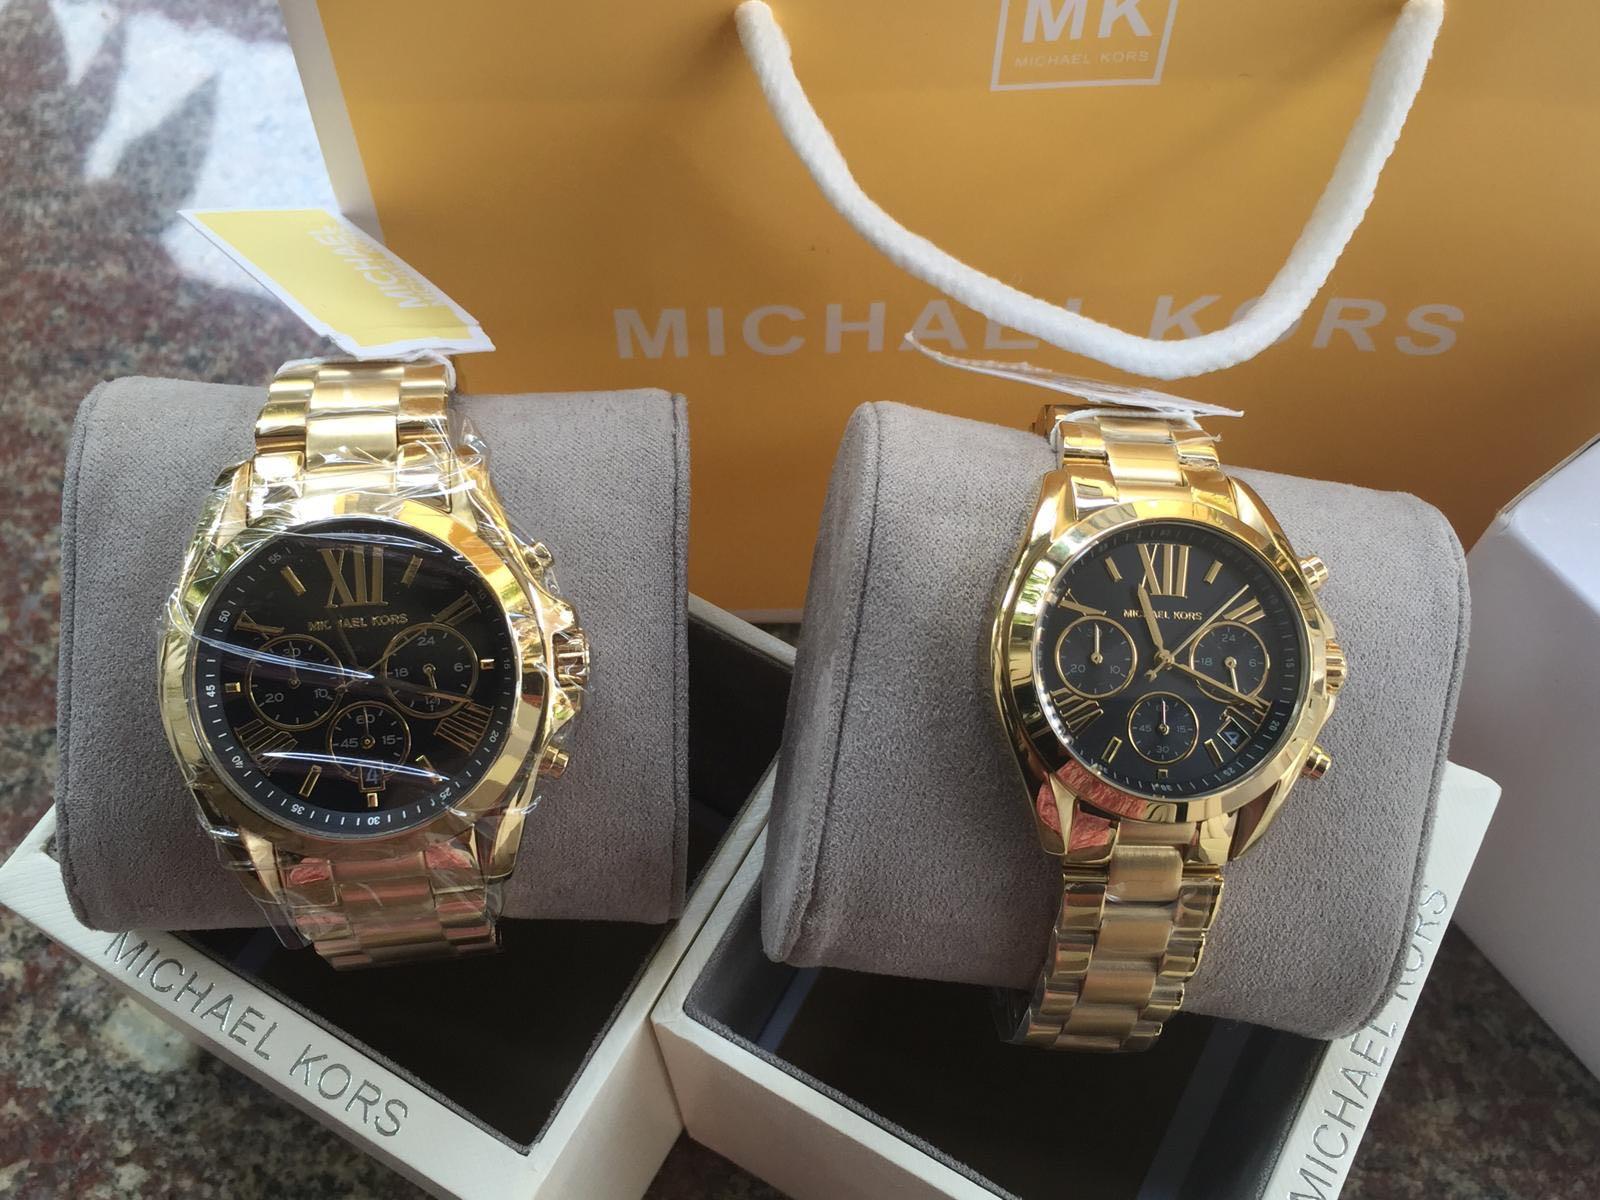 where is michael kors made from